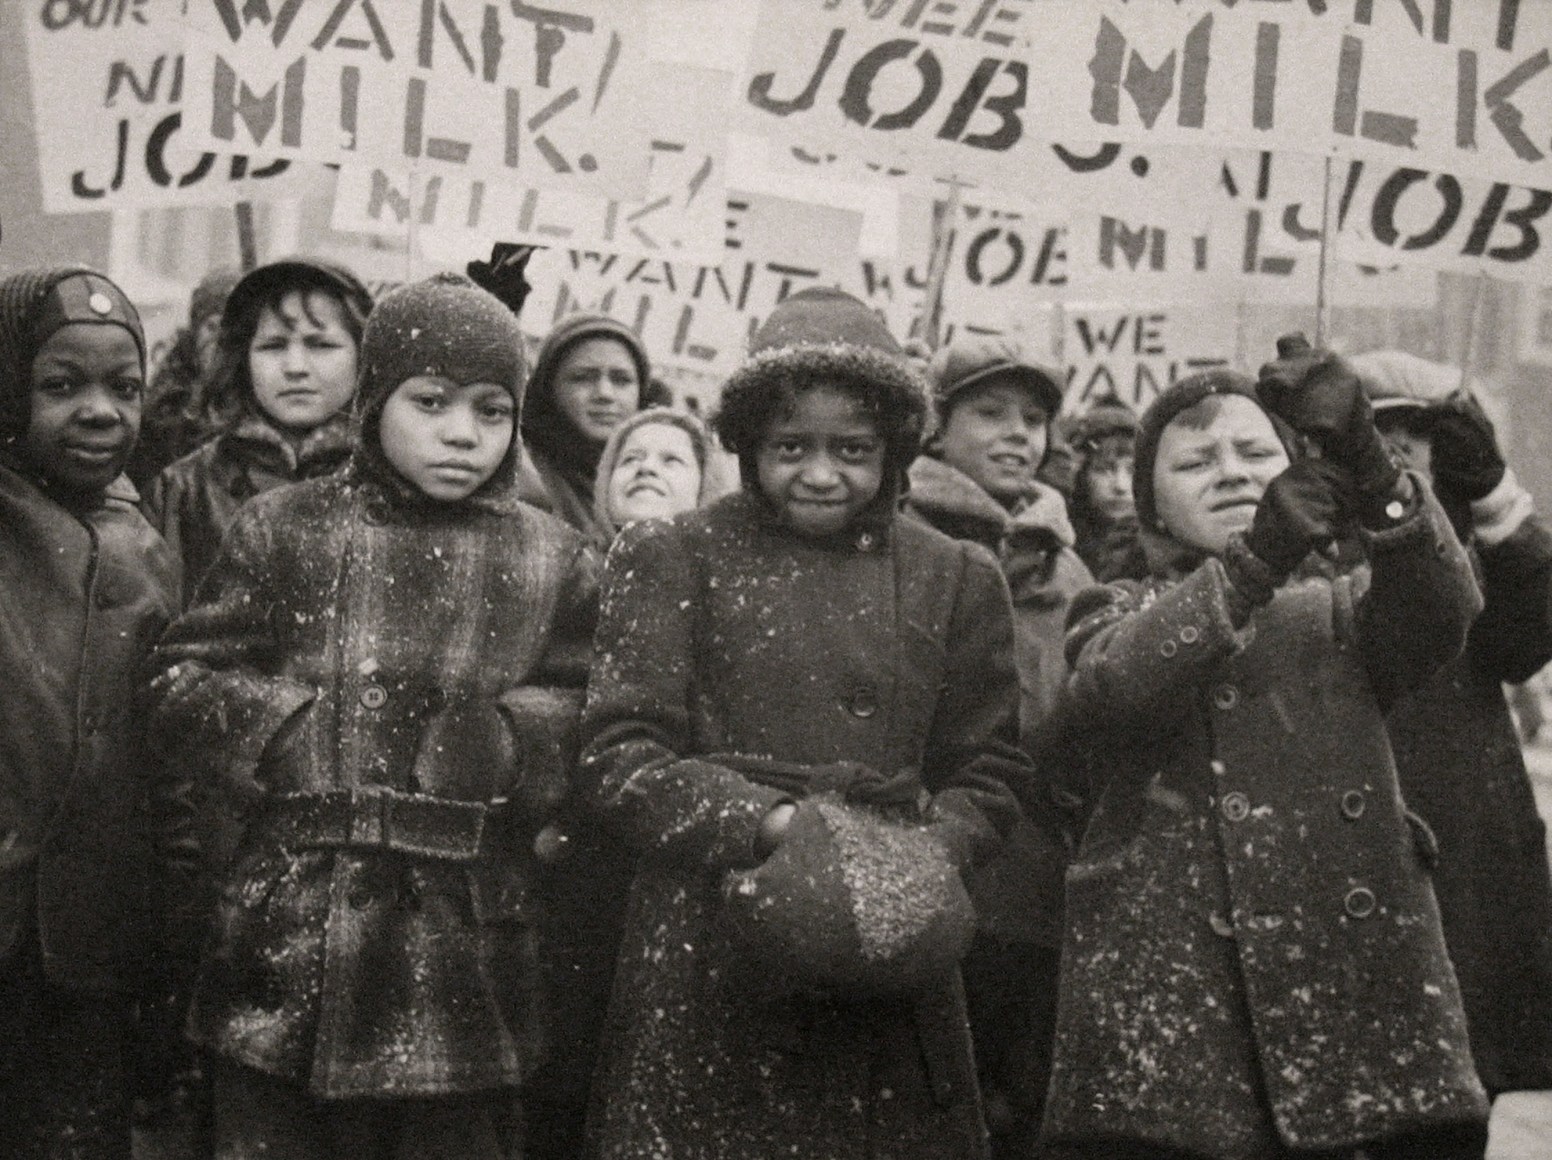 18. Gordon Coster, Untitled, ​c. 1938. Crowd of children in winter coats holding signs above their heads. Signs are in partial view, but the words &quot;MILK&quot; AND &quot;JOB&quot; can be seen.